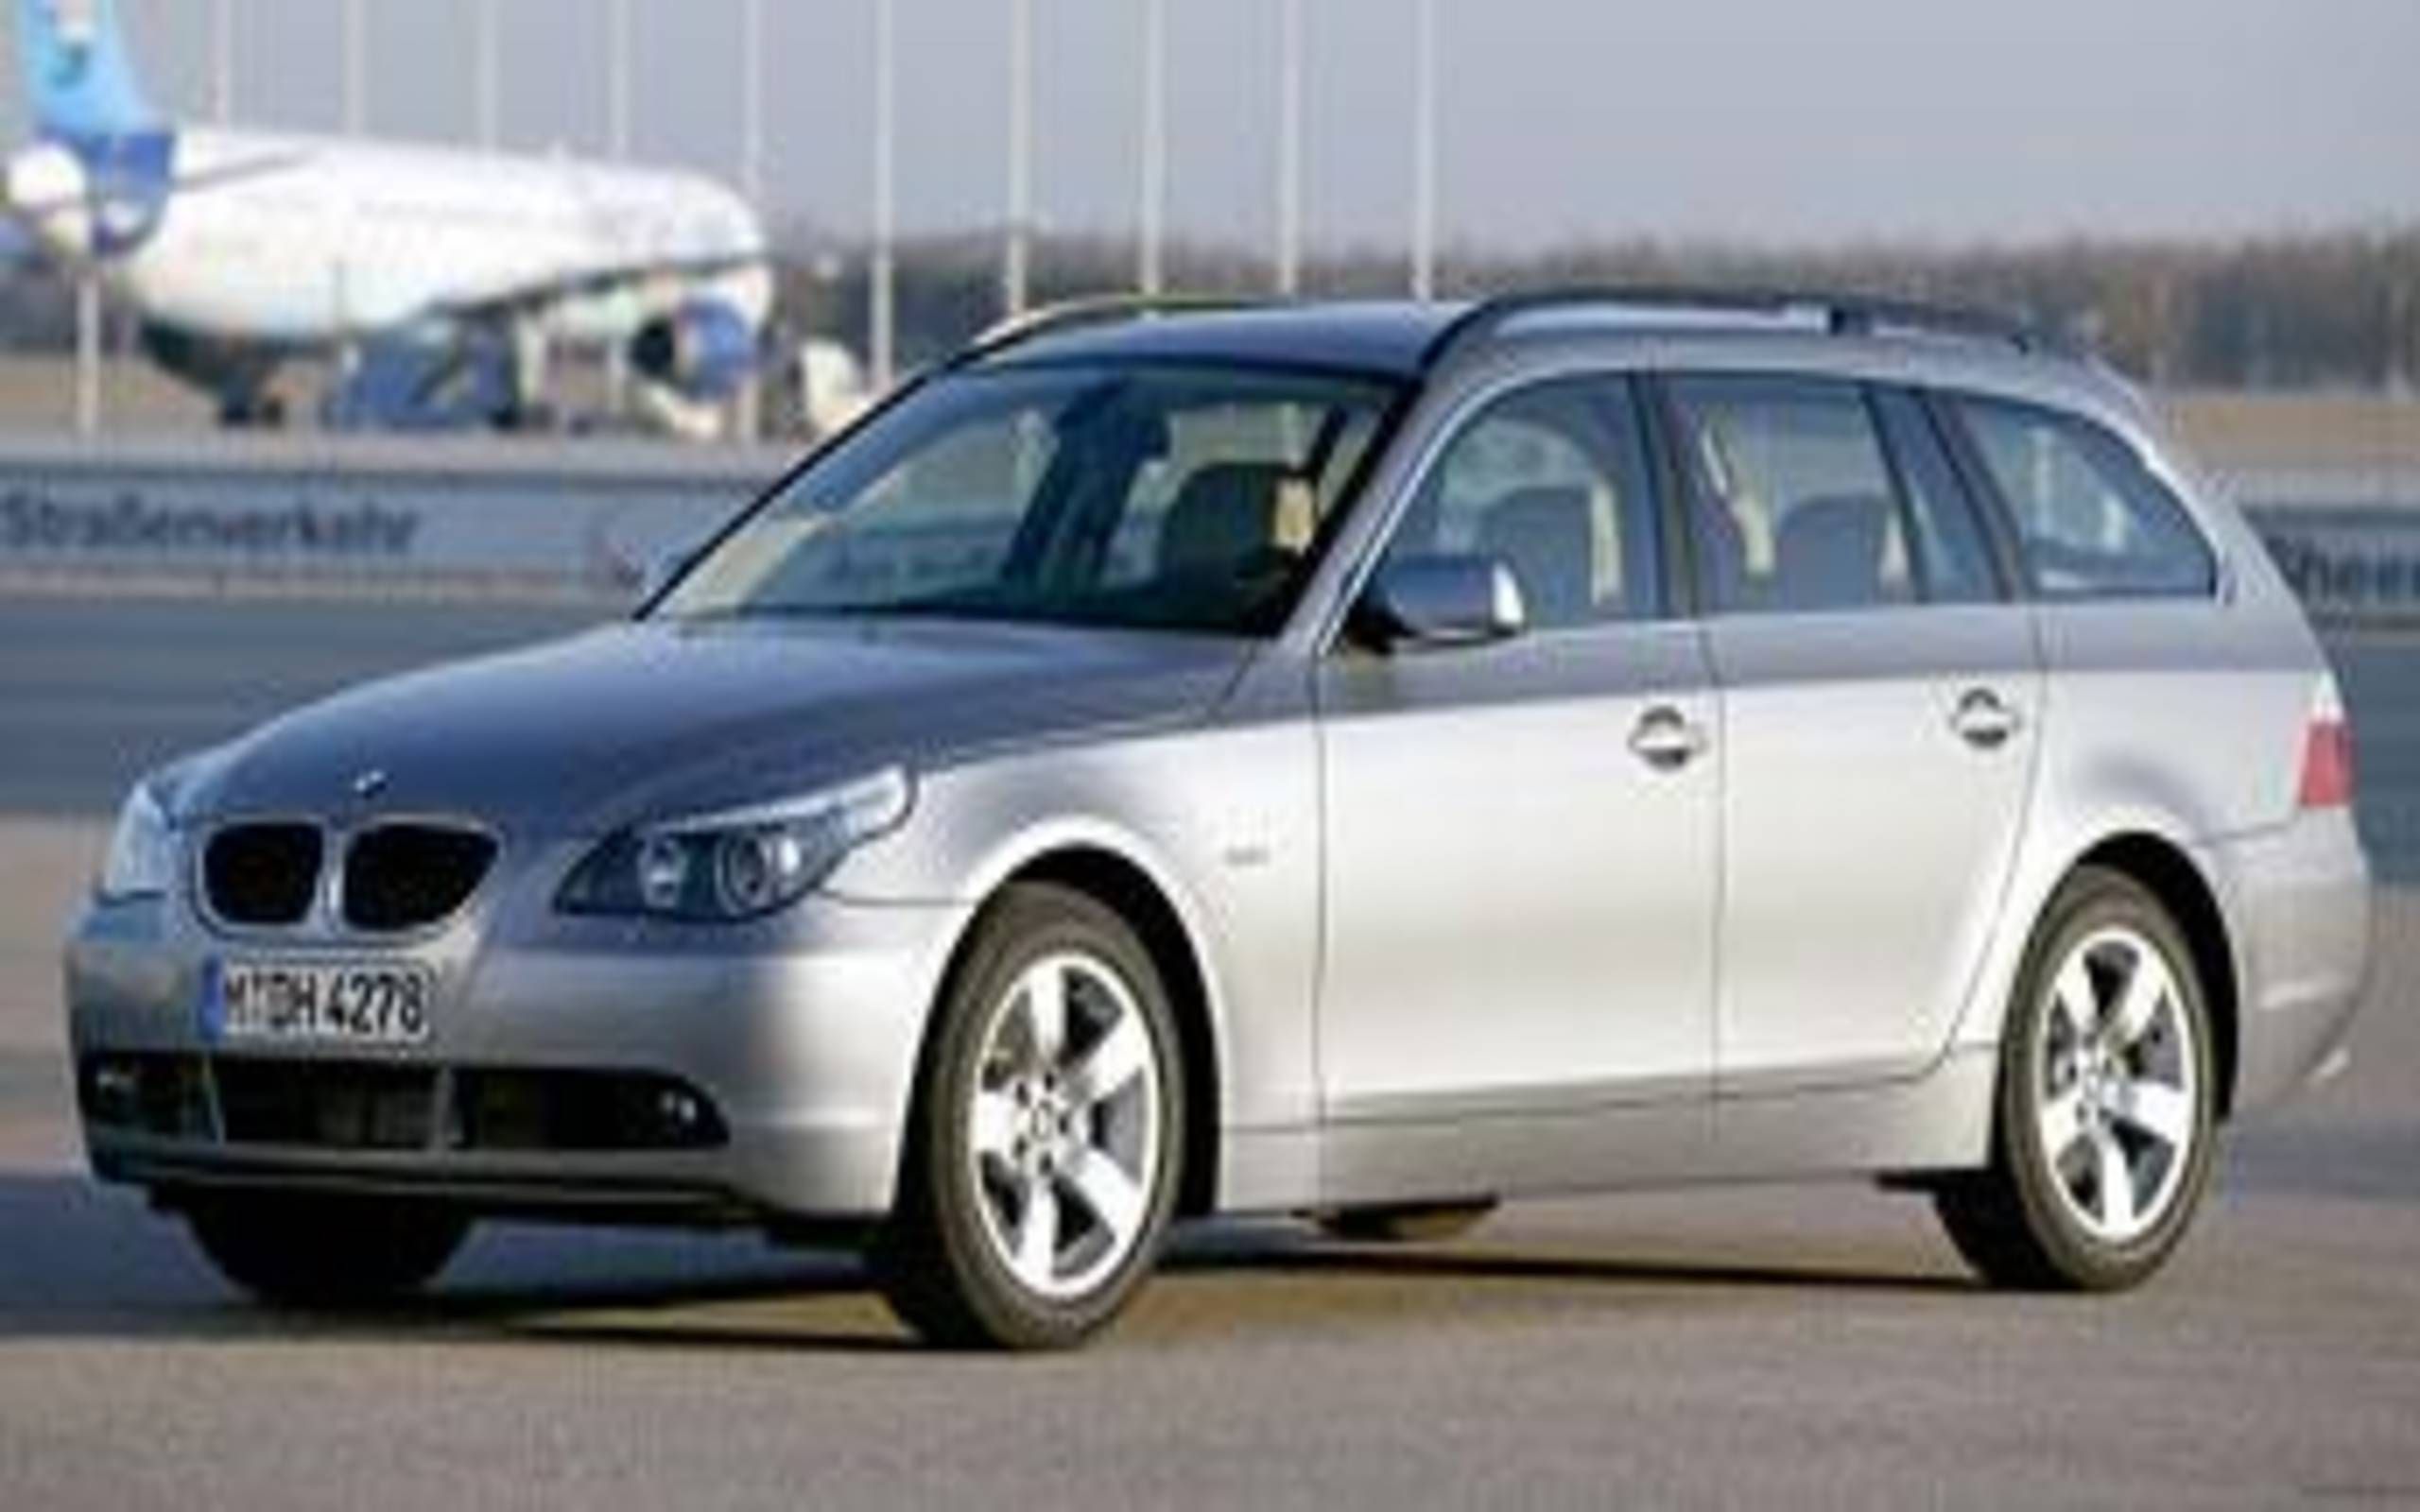 2005 BMW Touring: Latest 5 series Touring gets bigger, lighter